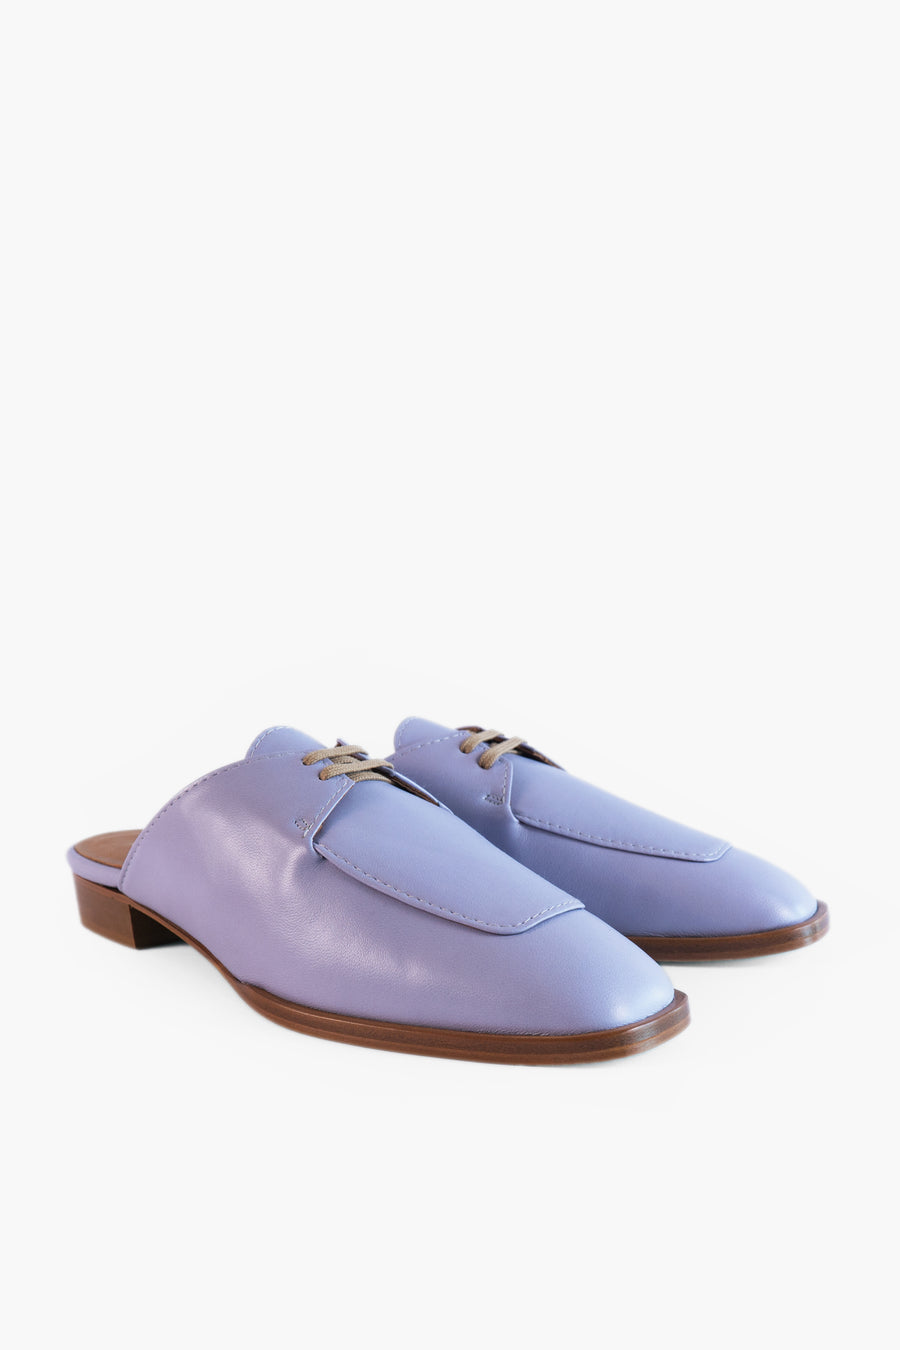 Sustainable Loafer in Lilac. Carefully produced from metal-free leather. Made in Germany by Alina Schürfeld.